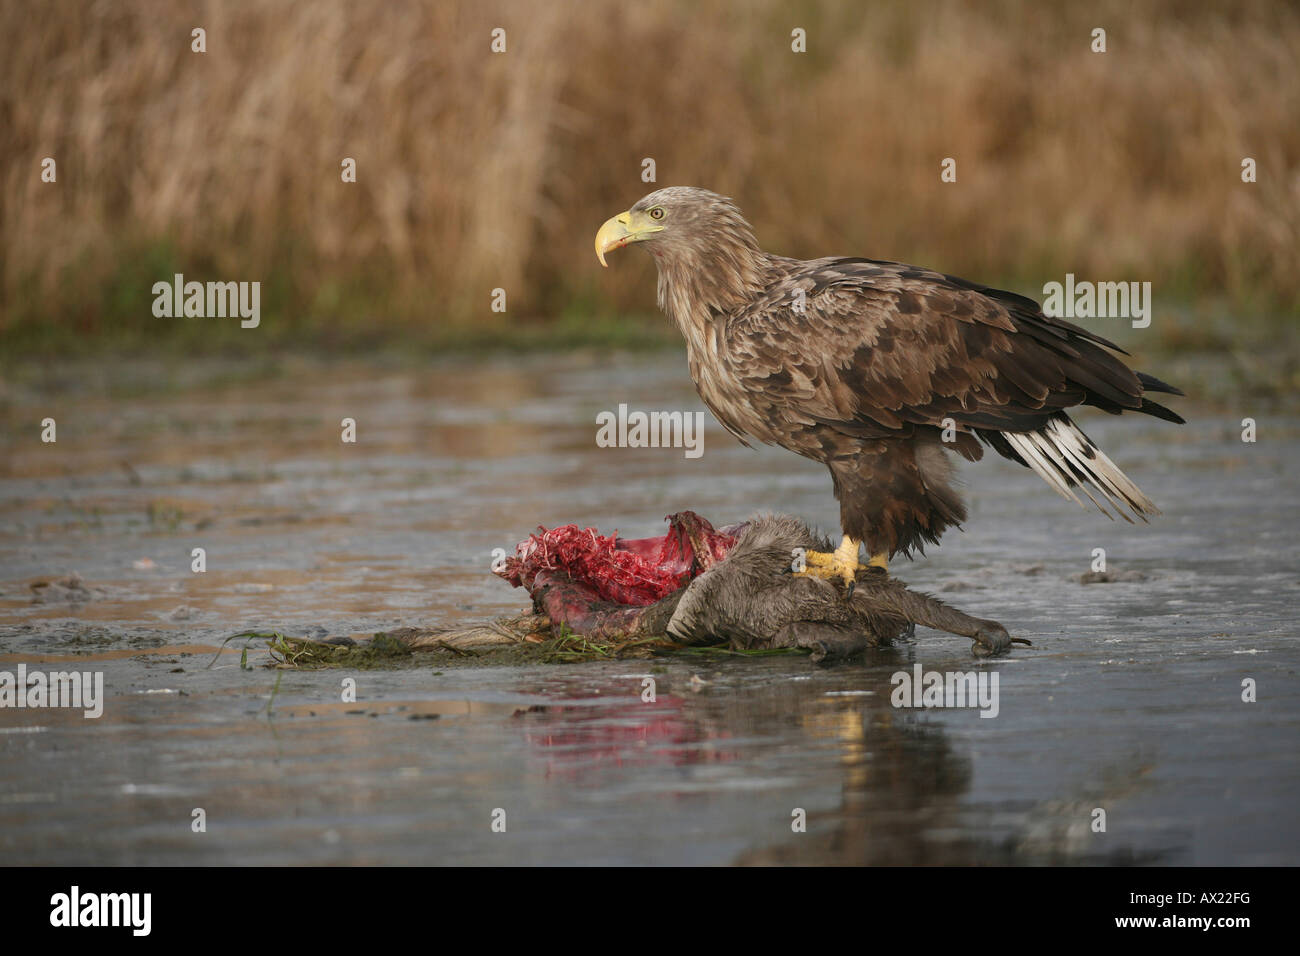 White-tailed Eagle or Sea Eagle (Haliaeetus albicilla) perched on an icy surface, feeding on deer carcass Stock Photo